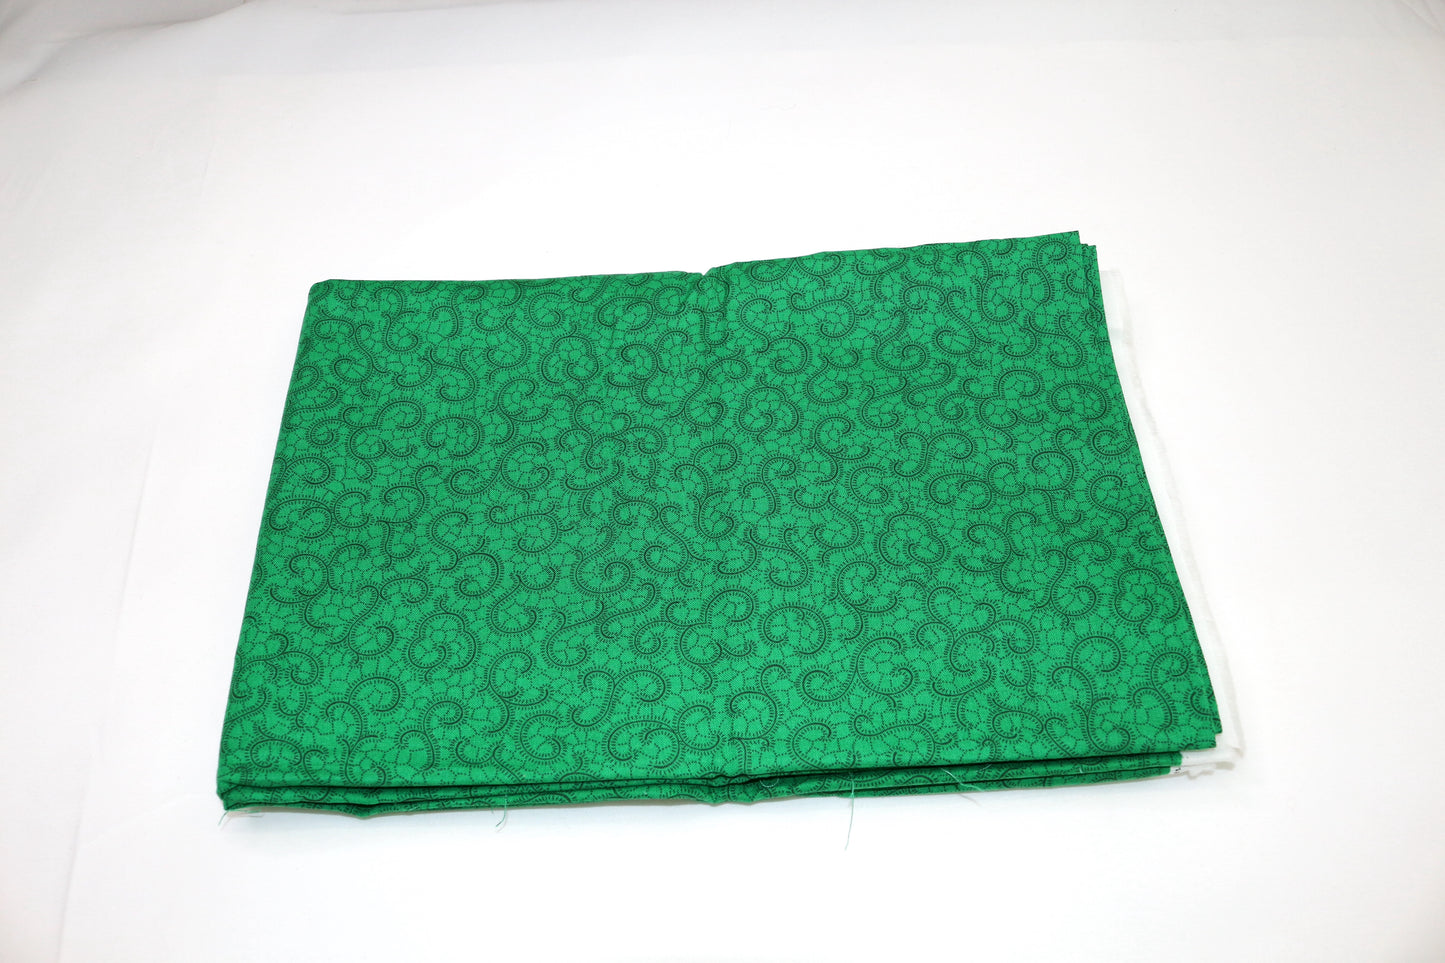 Whirlwind Design on the Green Cotton Fabric 45" x 1.5 yds